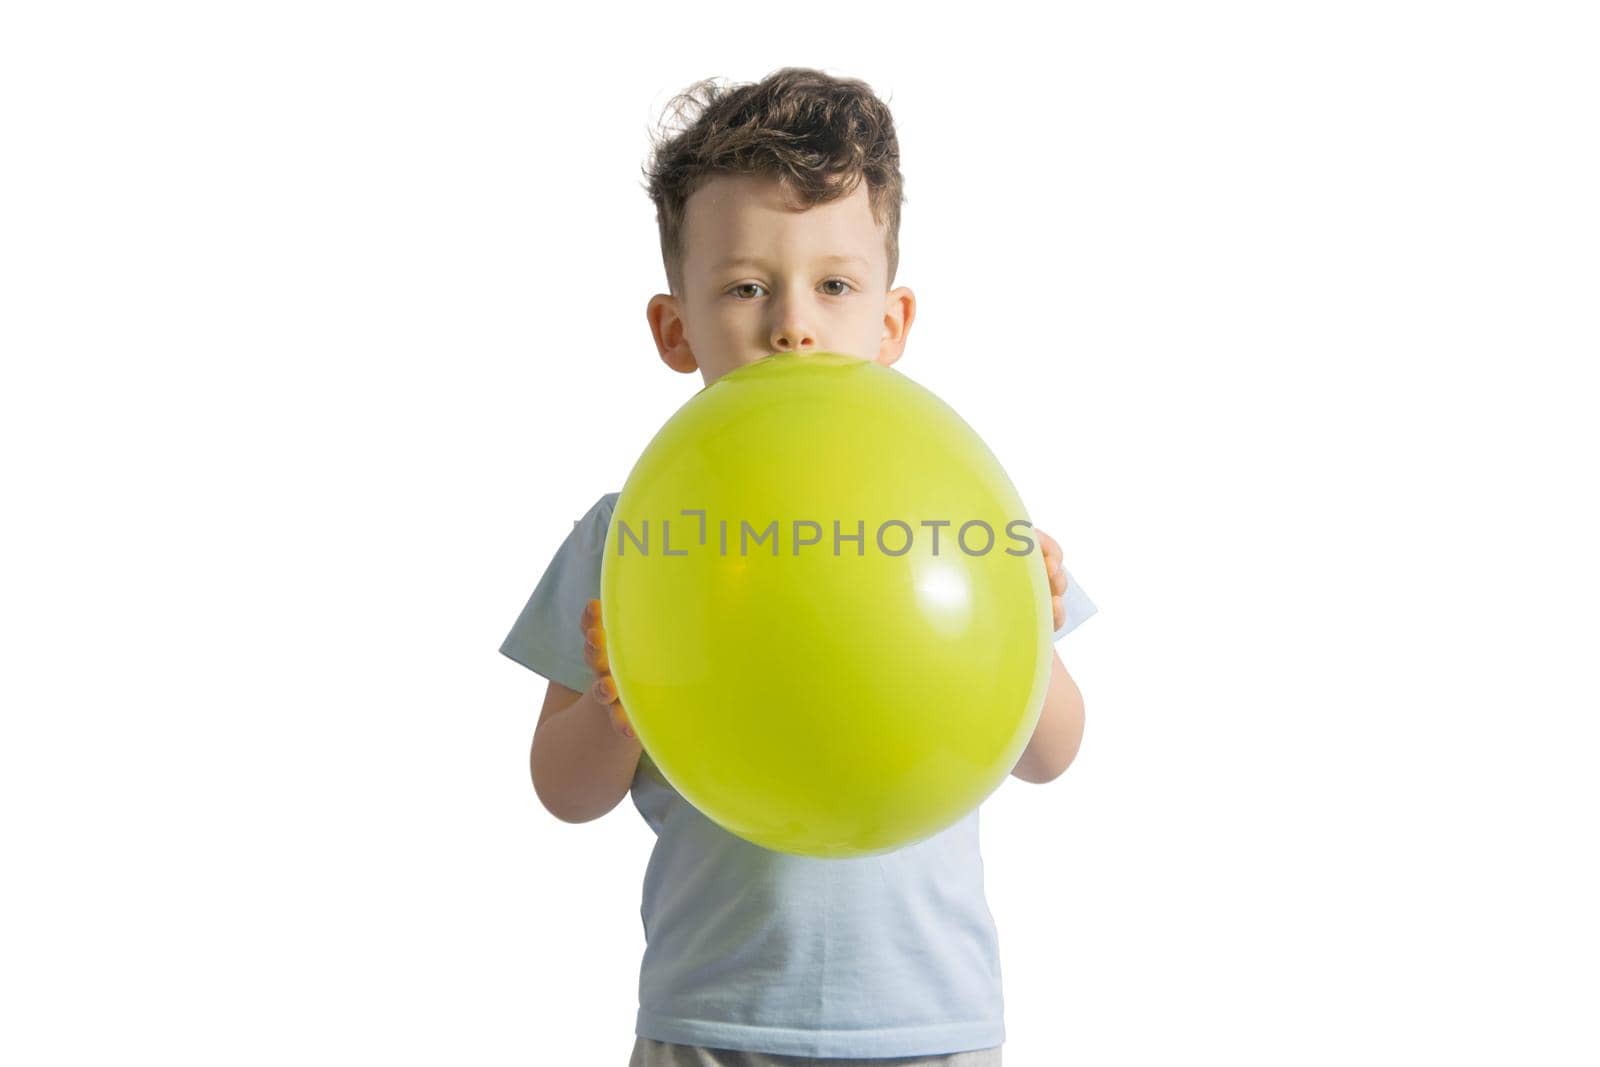 Funny boy blowing up a yellow balloon isolated on white background.